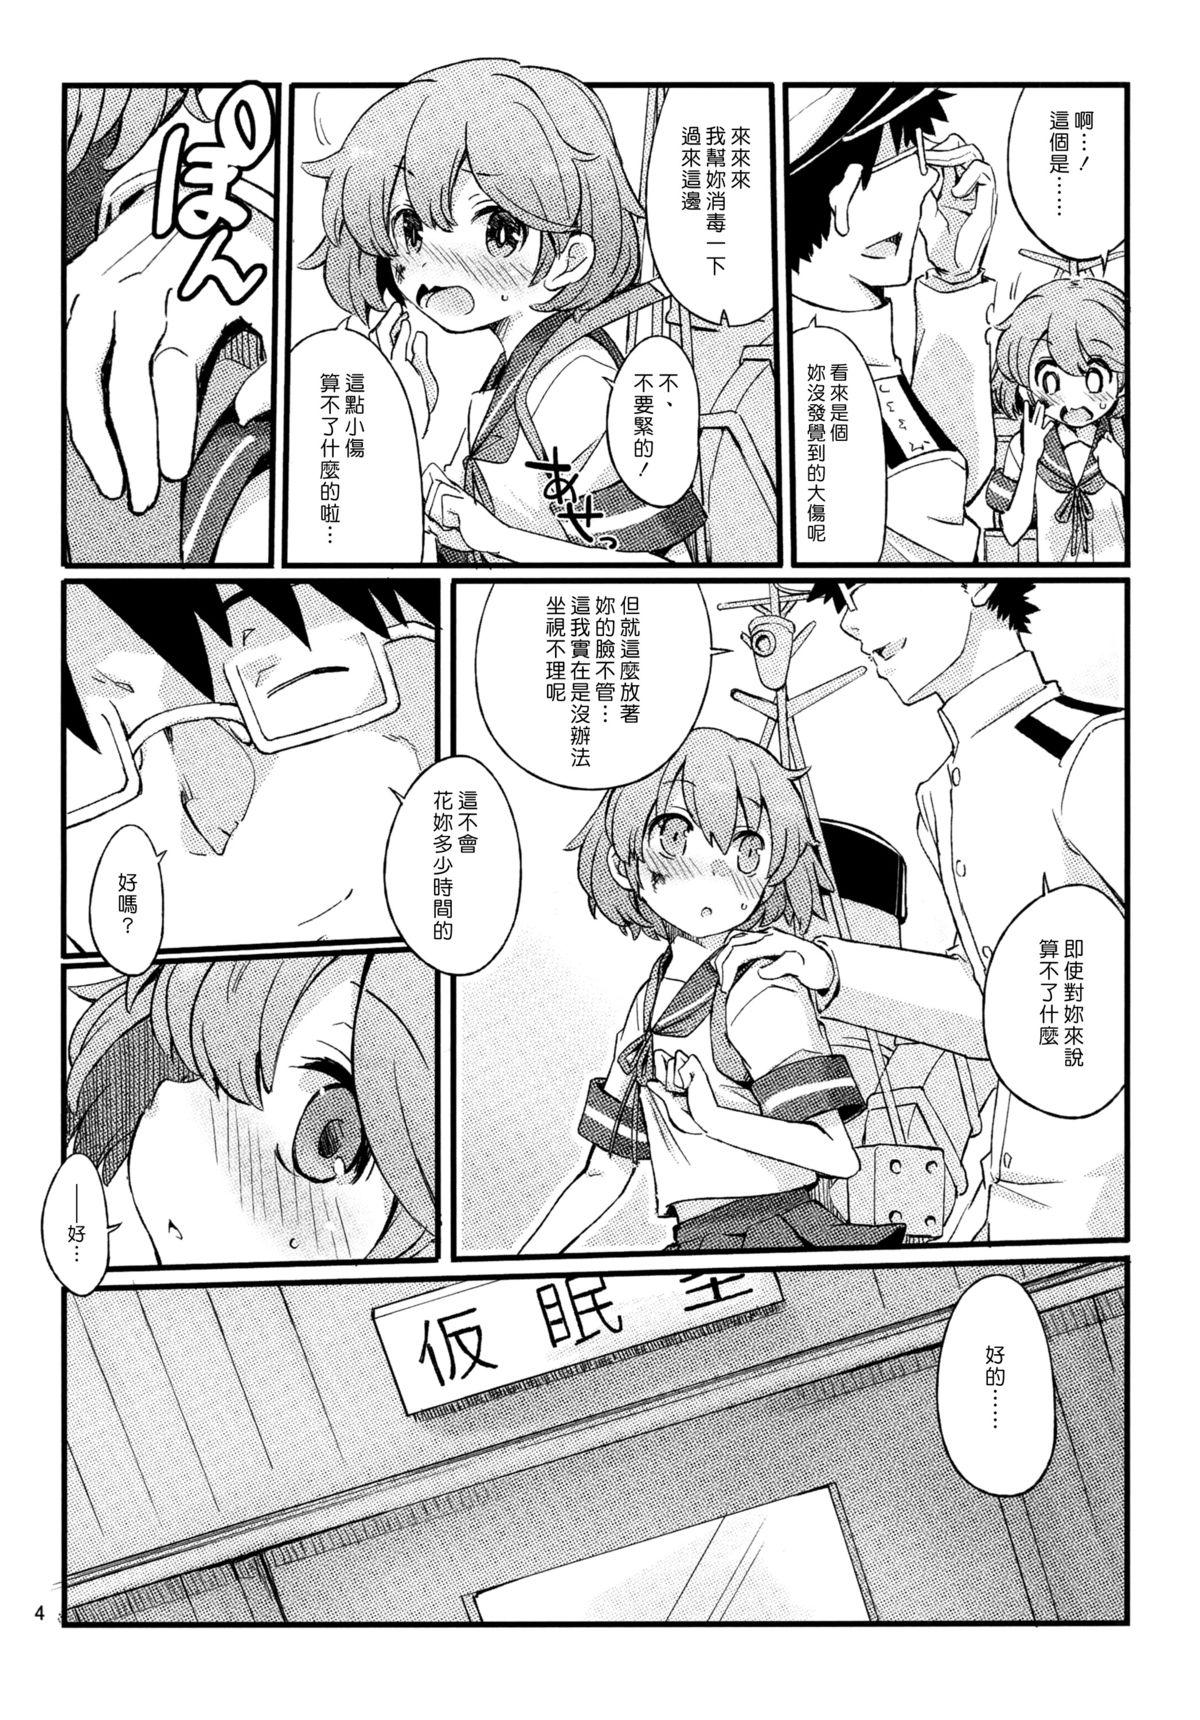 Secret Oboro no Bansoukou - Kantai collection Special Locations - Page 3